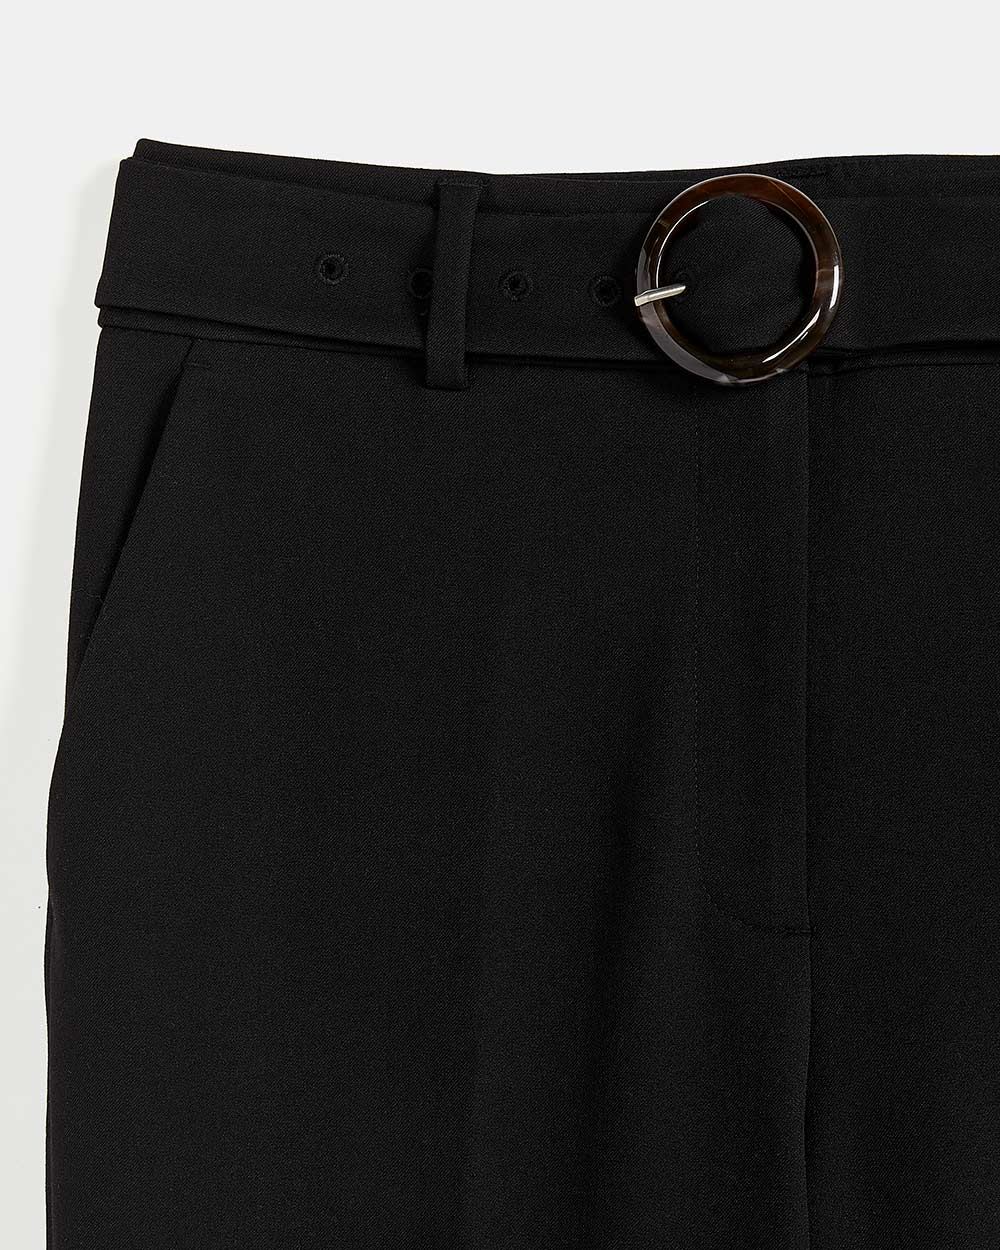 High-Waisted Cropped Black Pant - 27"